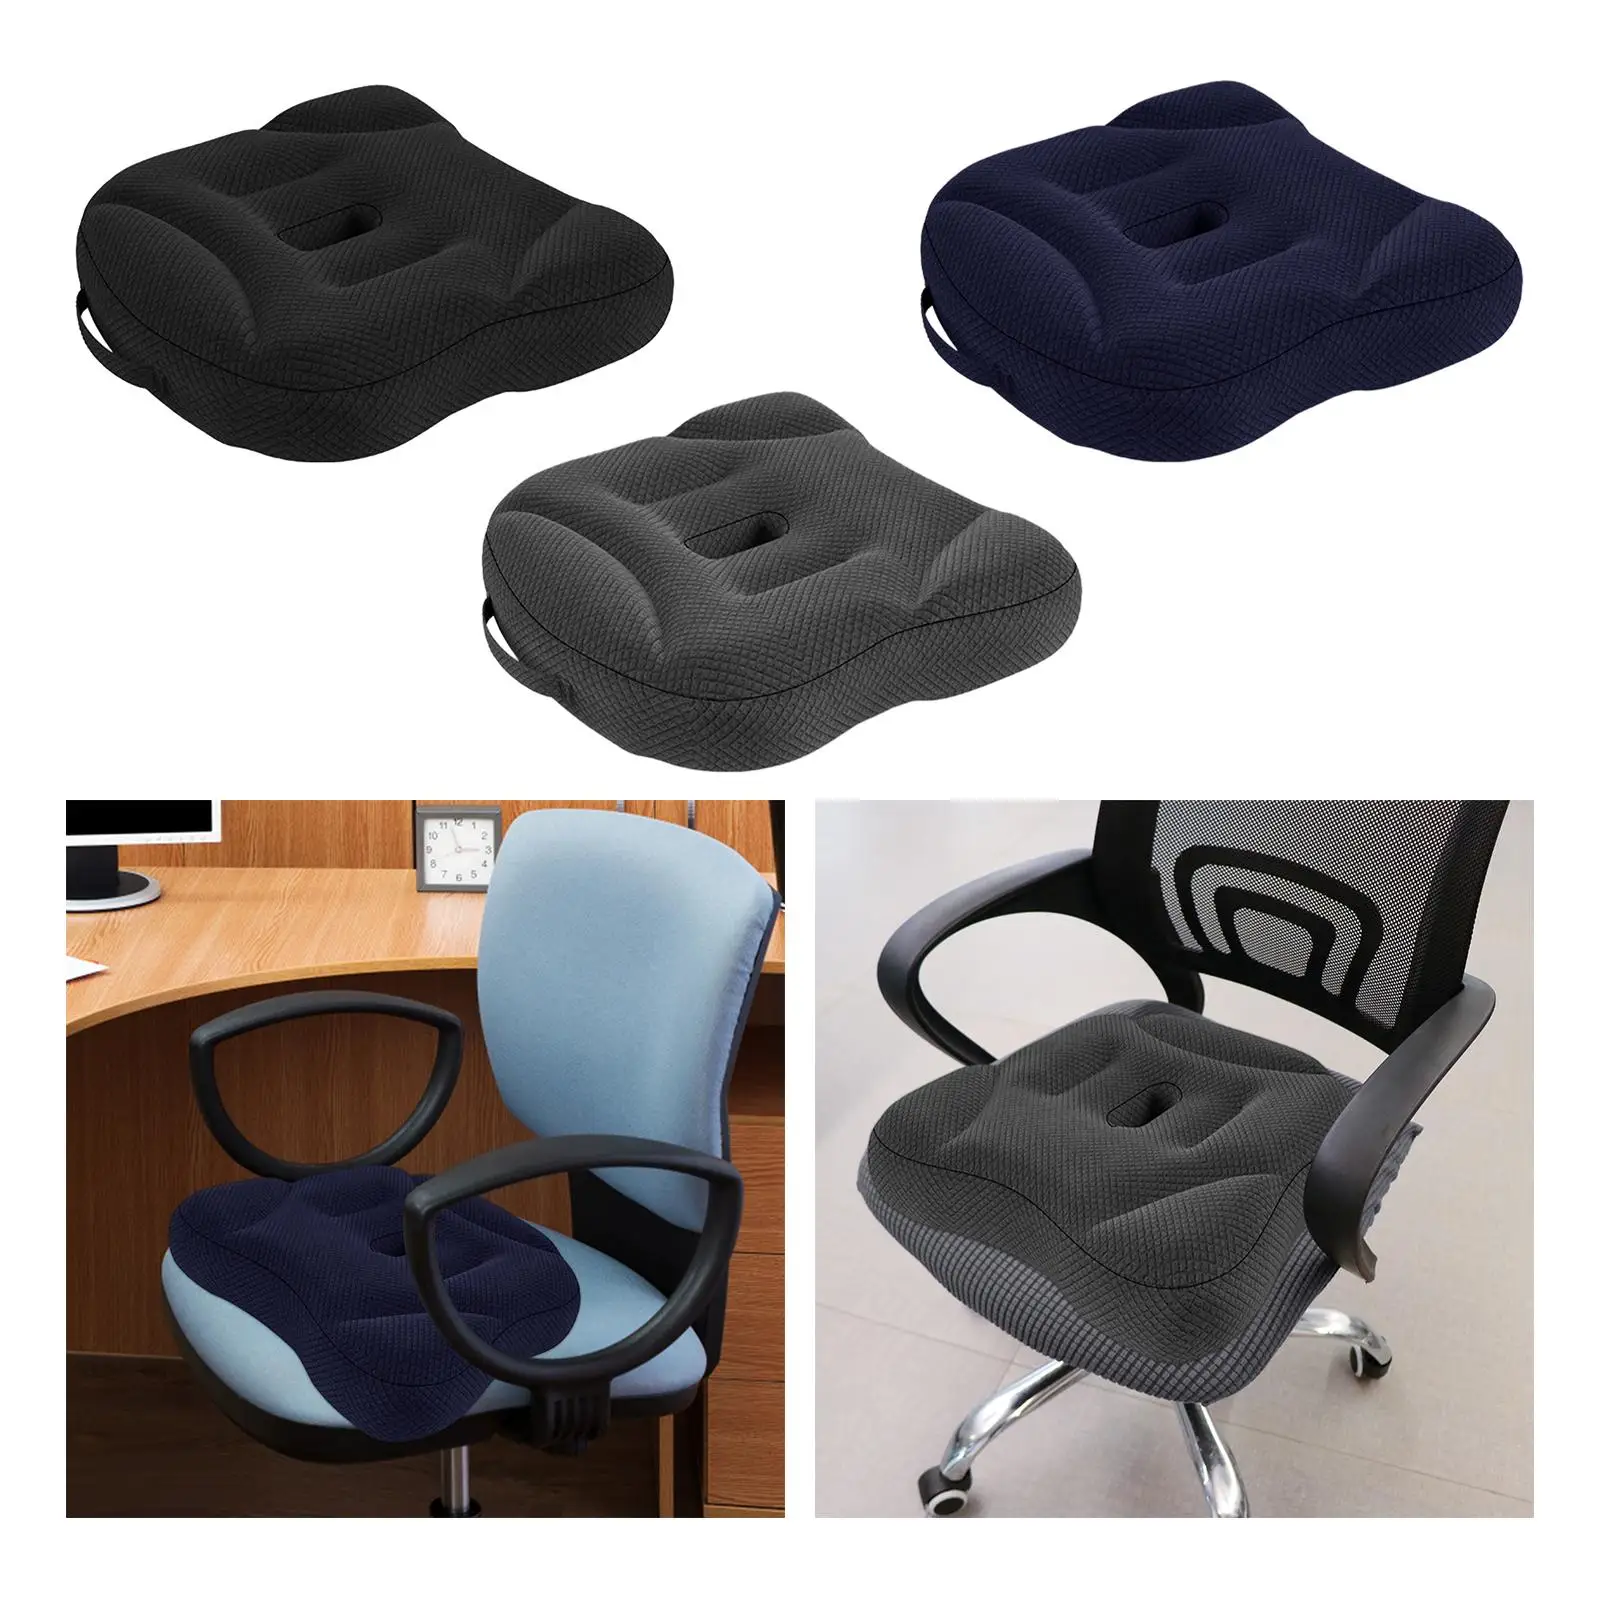 Seat Cushion Pillow for Office Desk Chair Cushion for Office Home Traveling